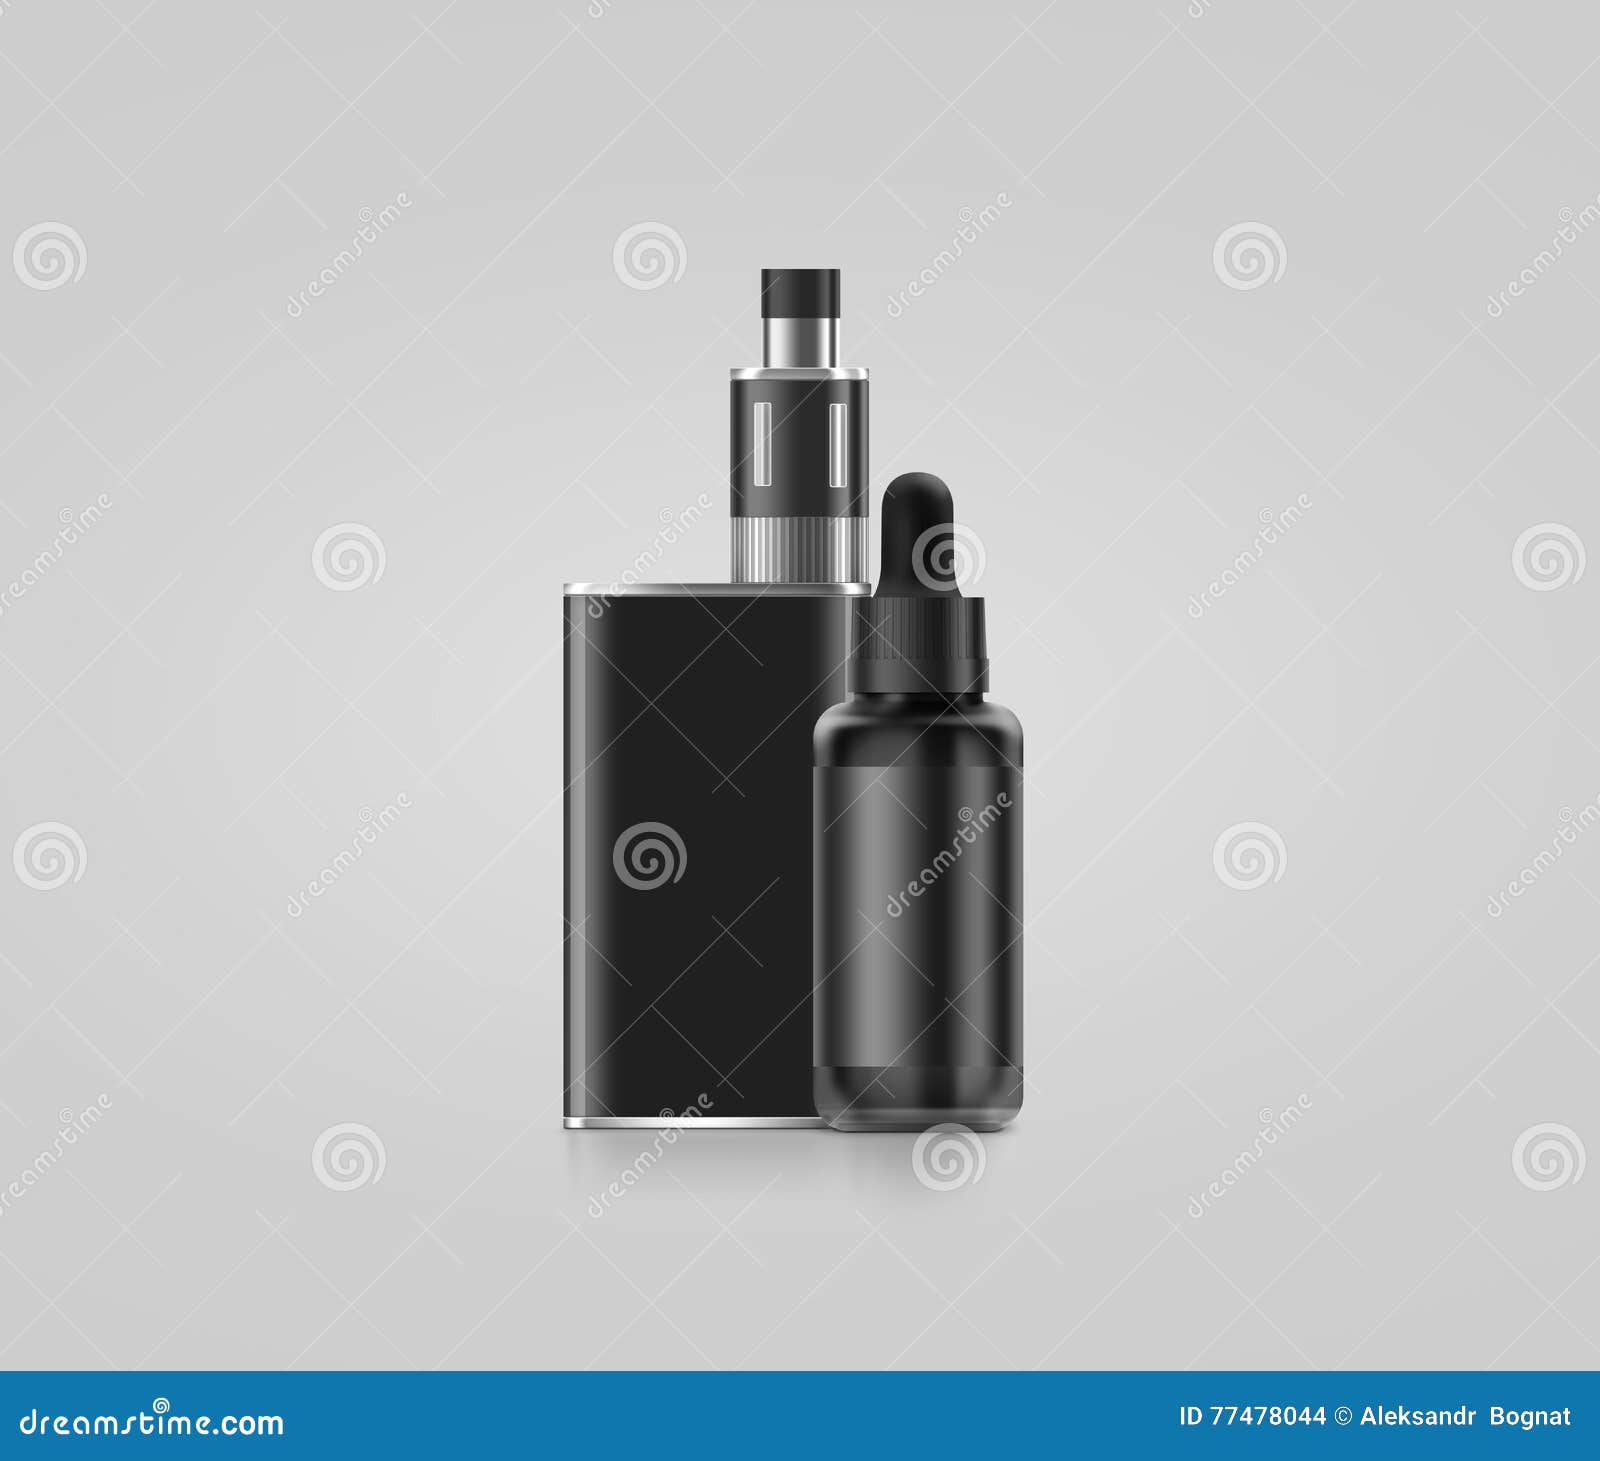 Vape Stock Photos Royalty Free Pictures